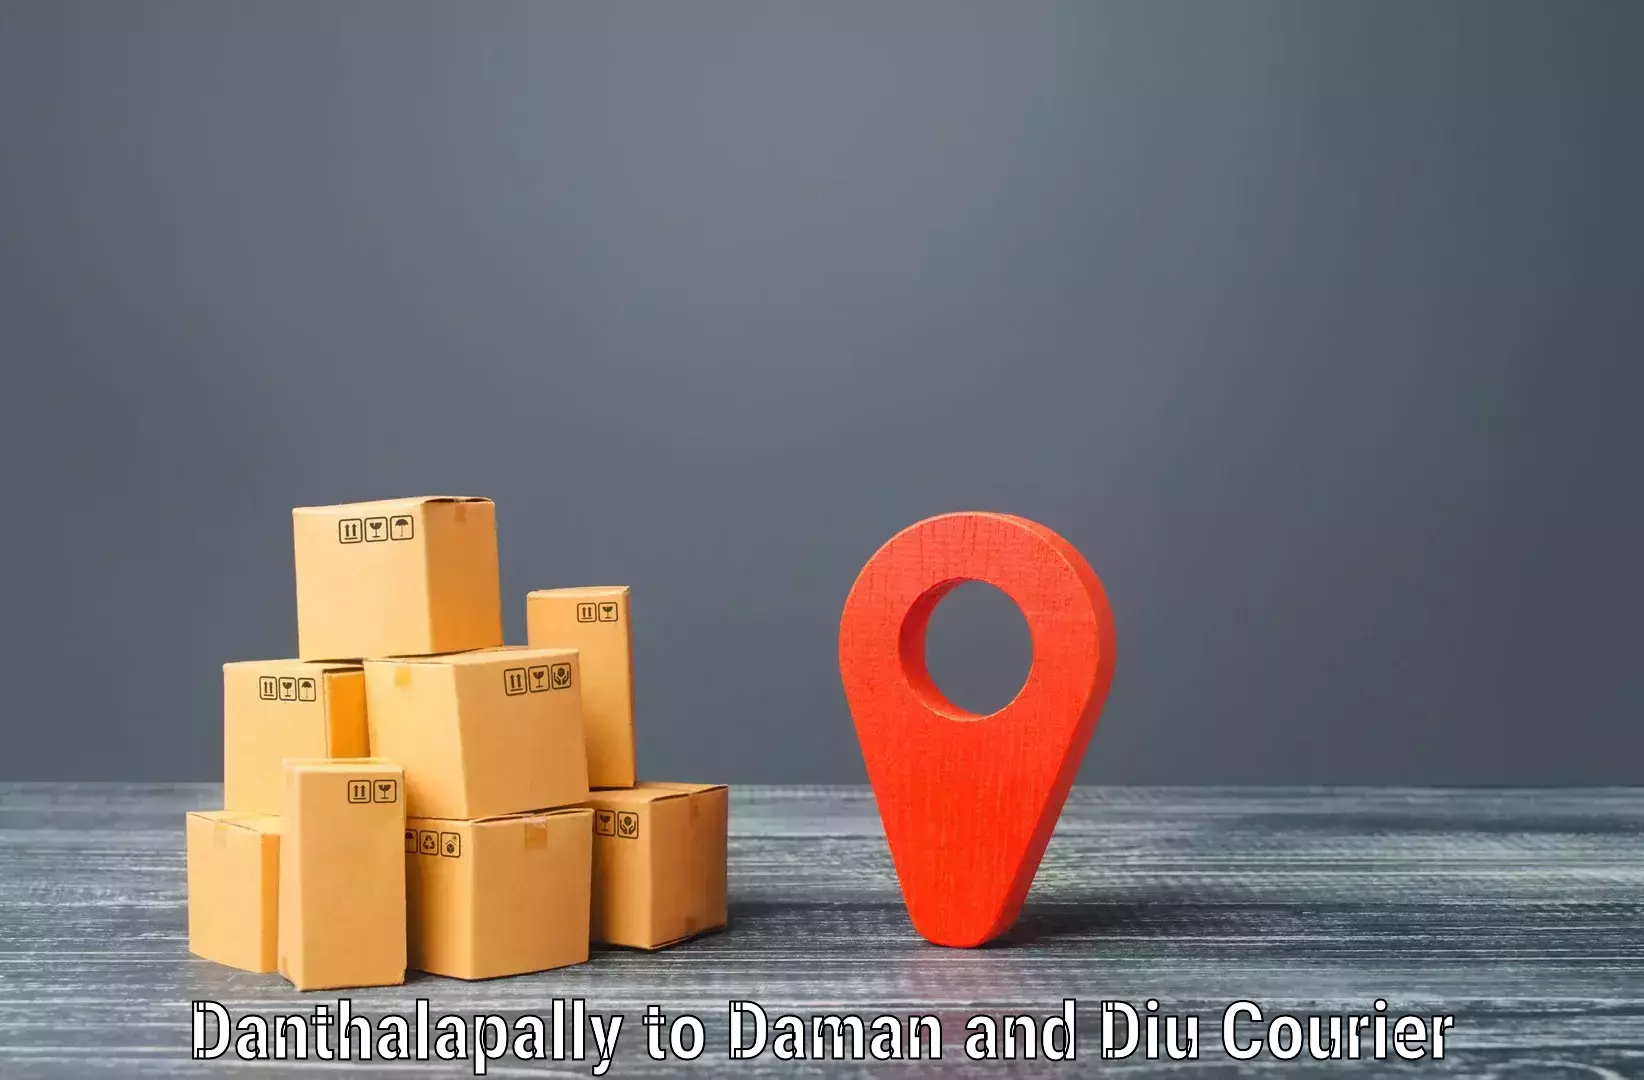 Parcel delivery automation Danthalapally to Diu